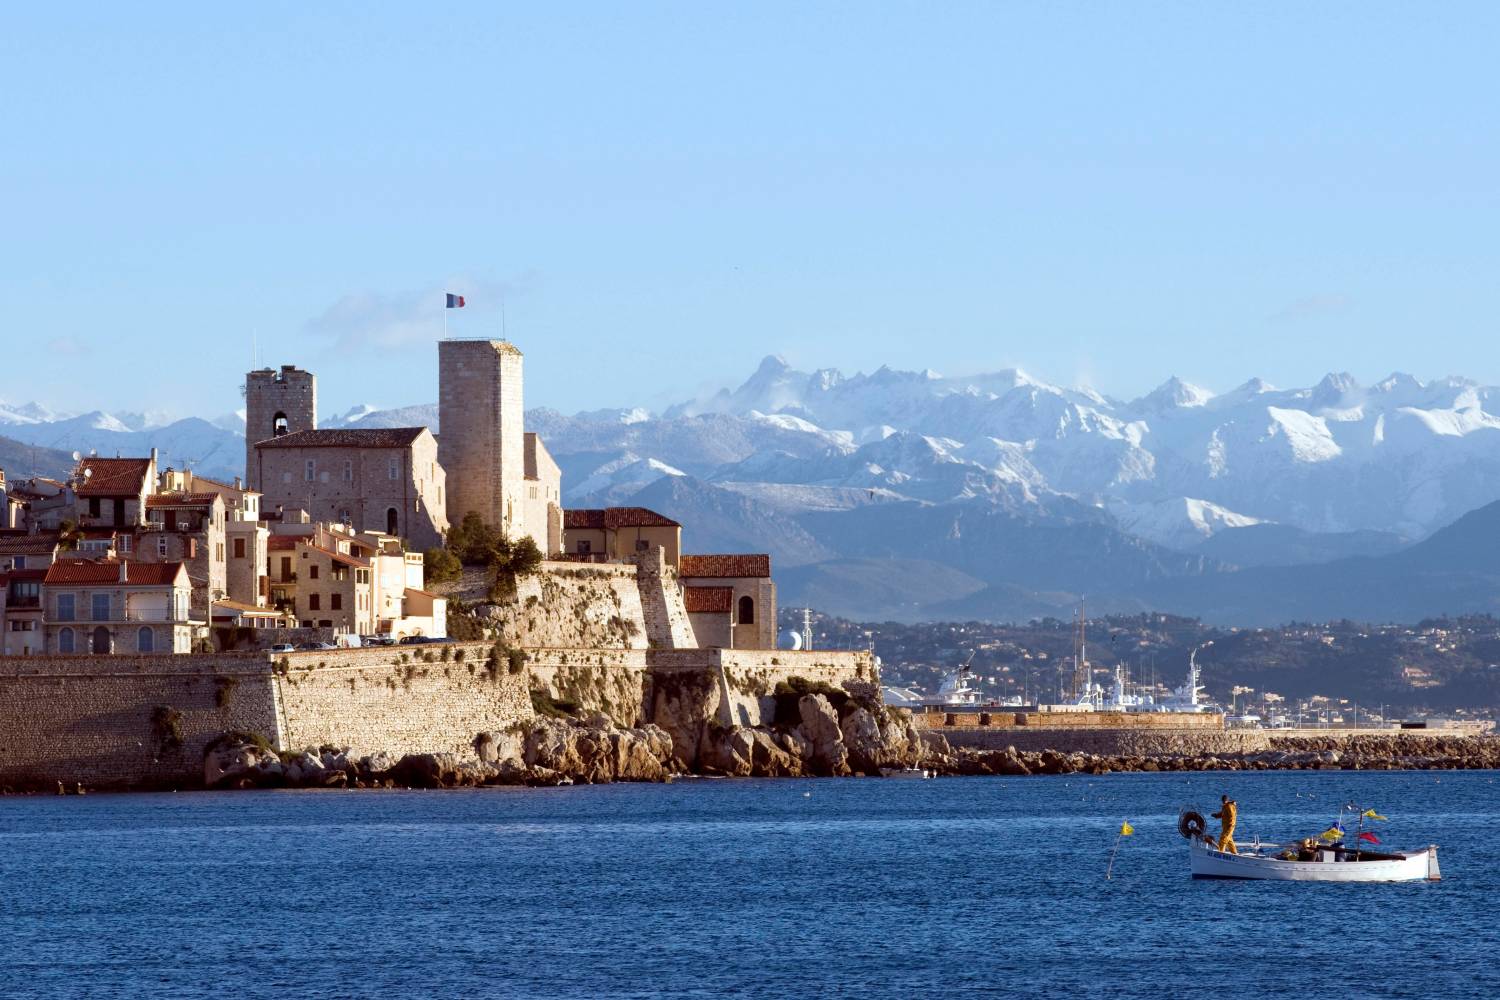 Enjoy a private chef after an amazing day in Antibes - Take a Chef